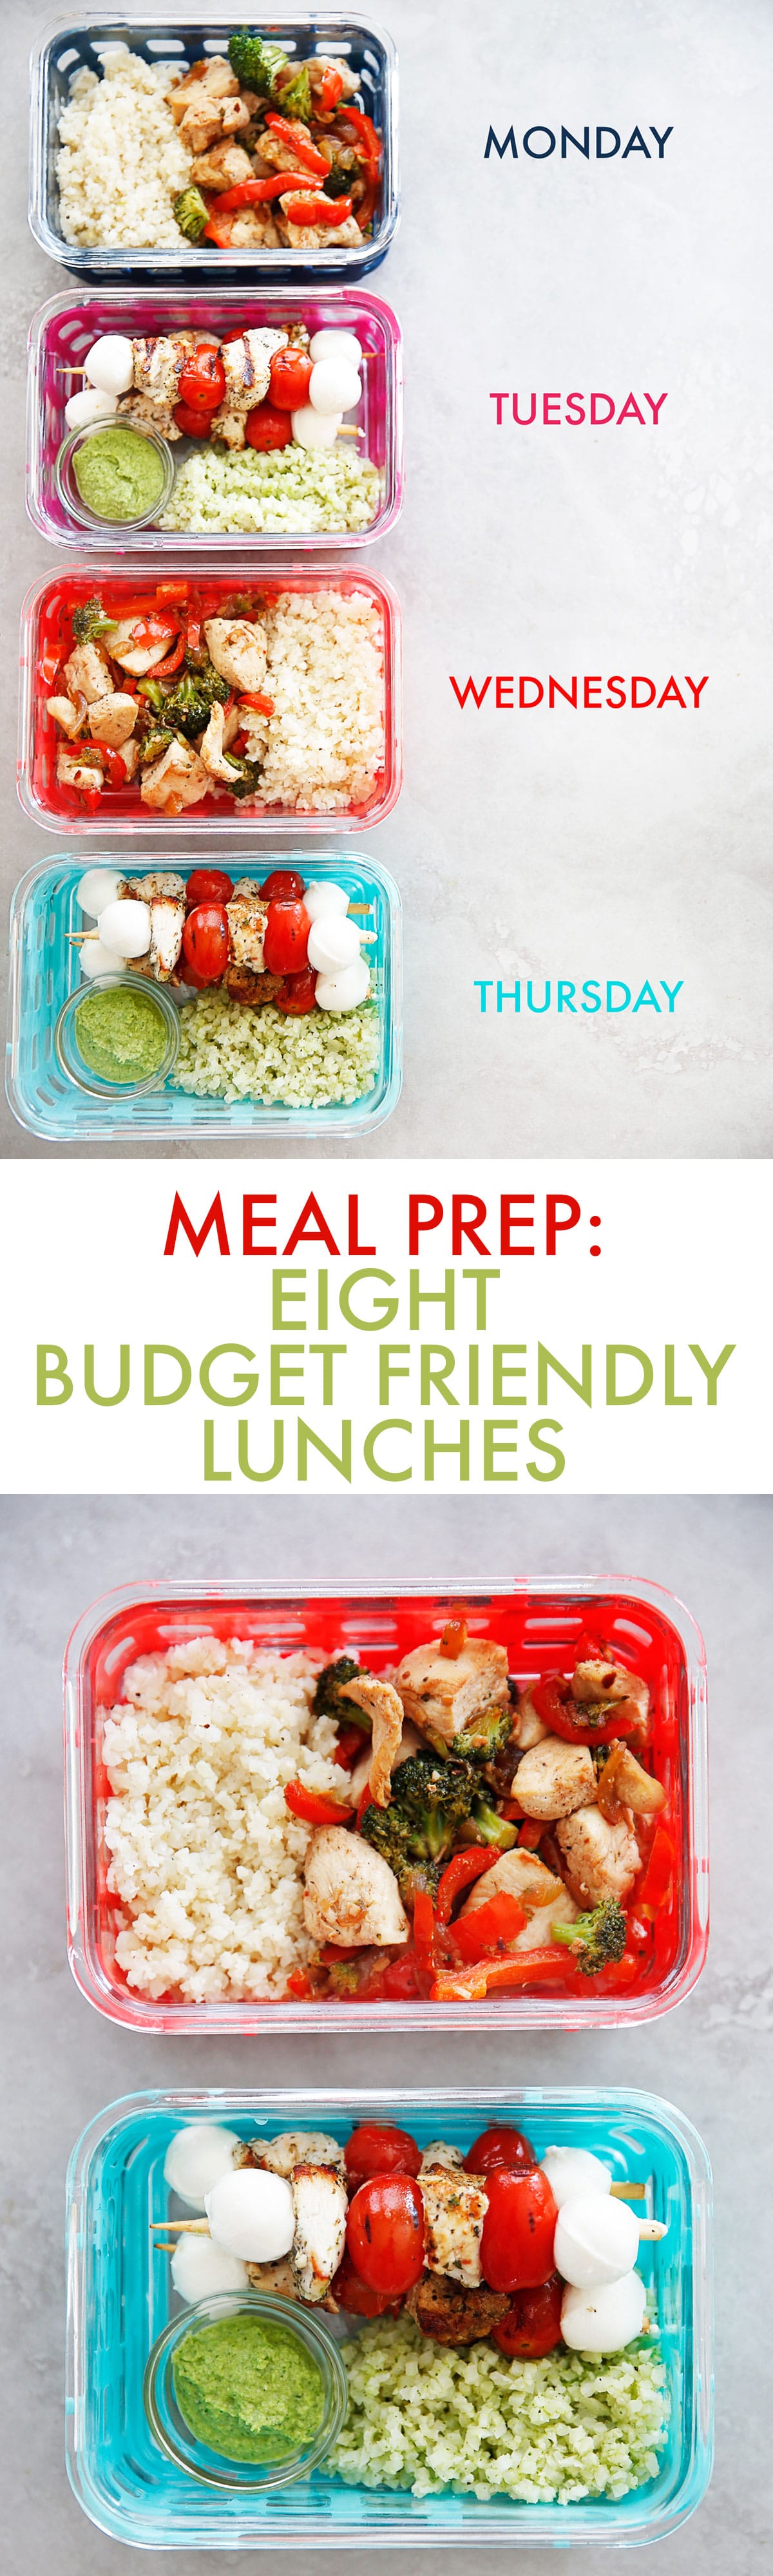 Meal Prep: 8 Budget Friendly Lunches | Lexi's Clean Kitchen